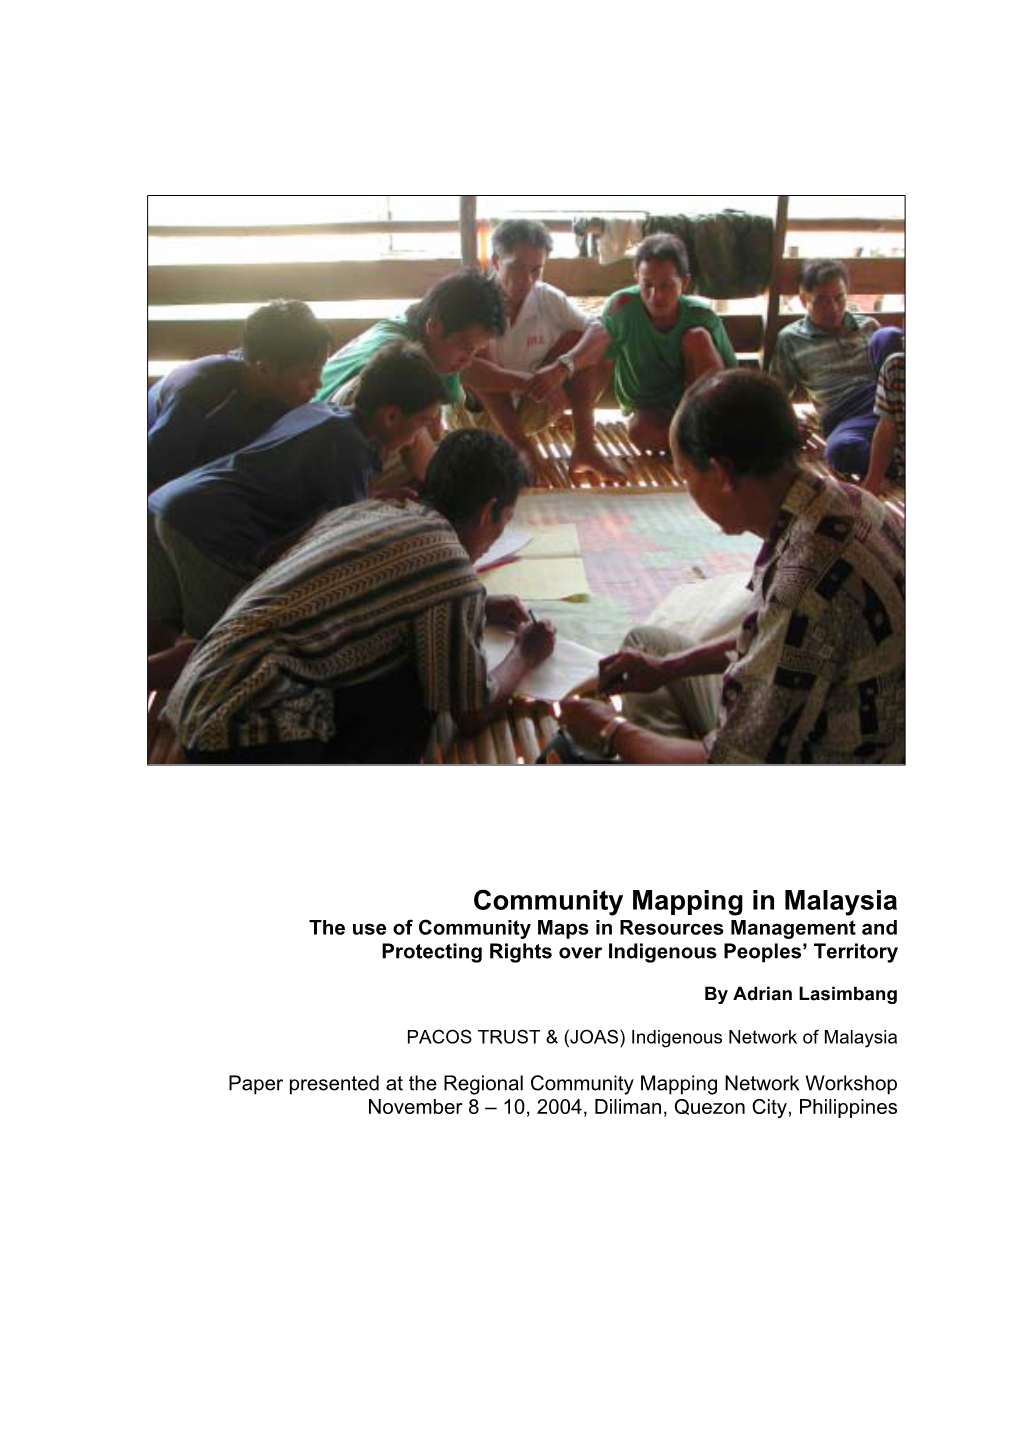 Community Mapping in Malaysia the Use of Community Maps in Resources Management and Protecting Rights Over Indigenous Peoples’ Territory